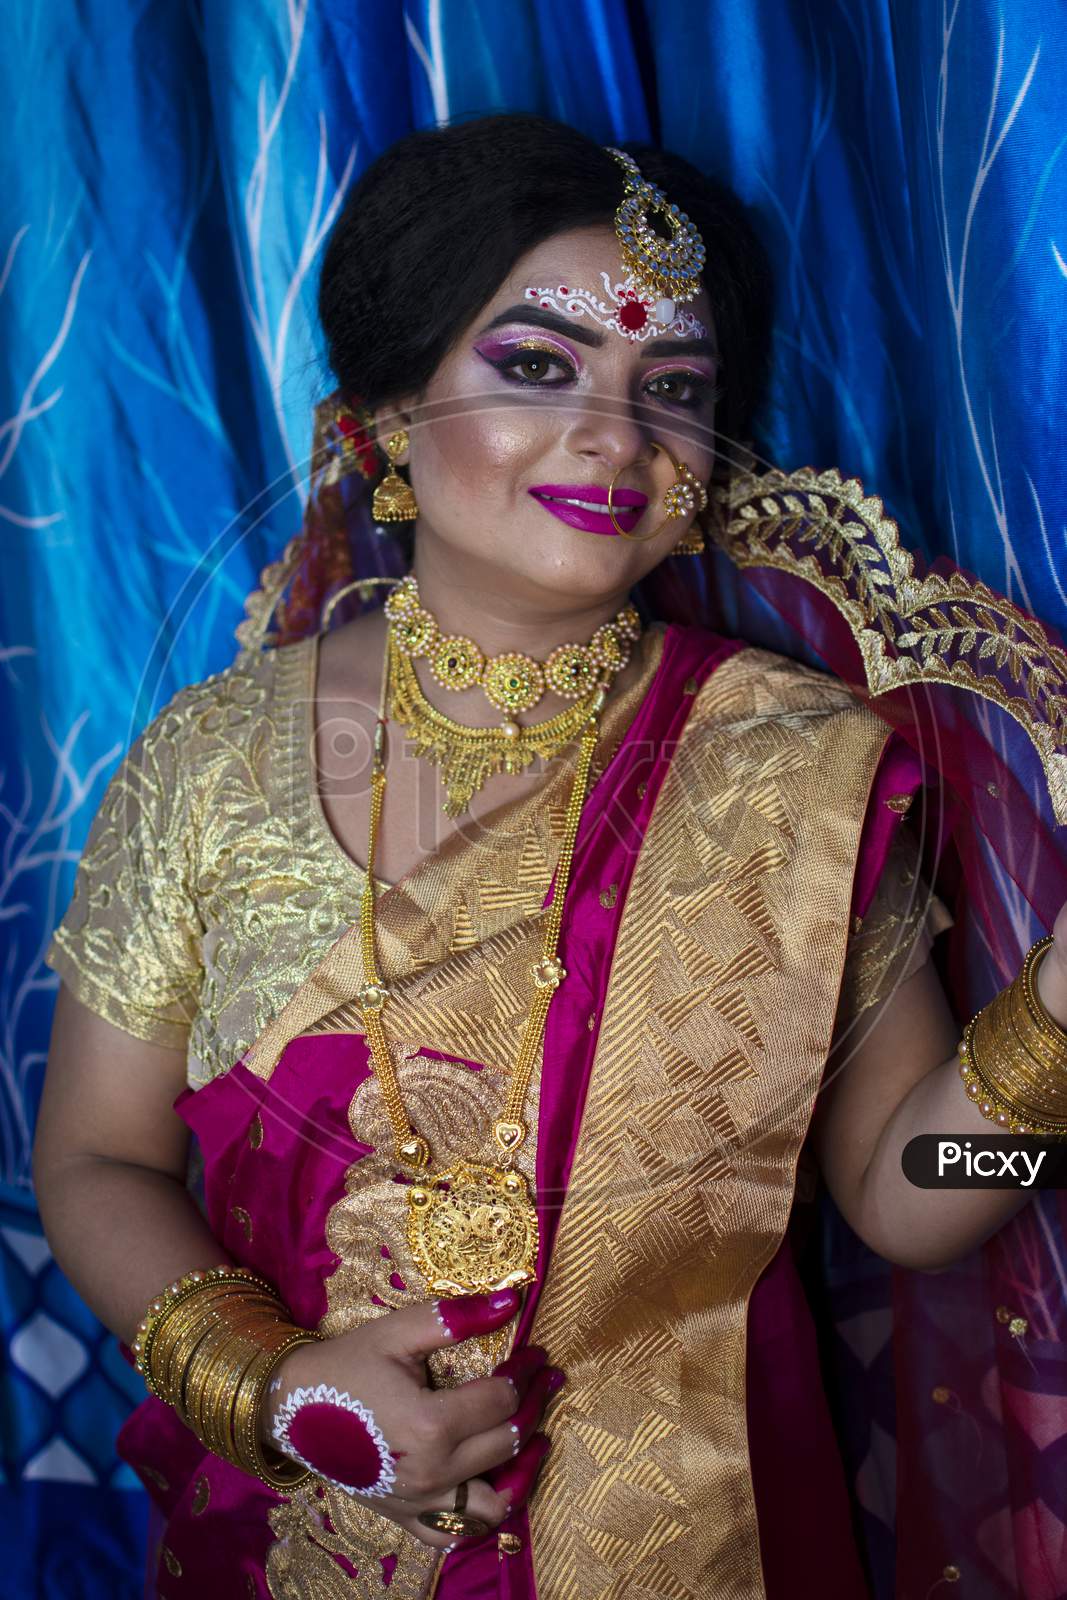 Portrait Of A Cute Indian Model In Bridal Look With Heavy Gold Jewelry And Red Sari